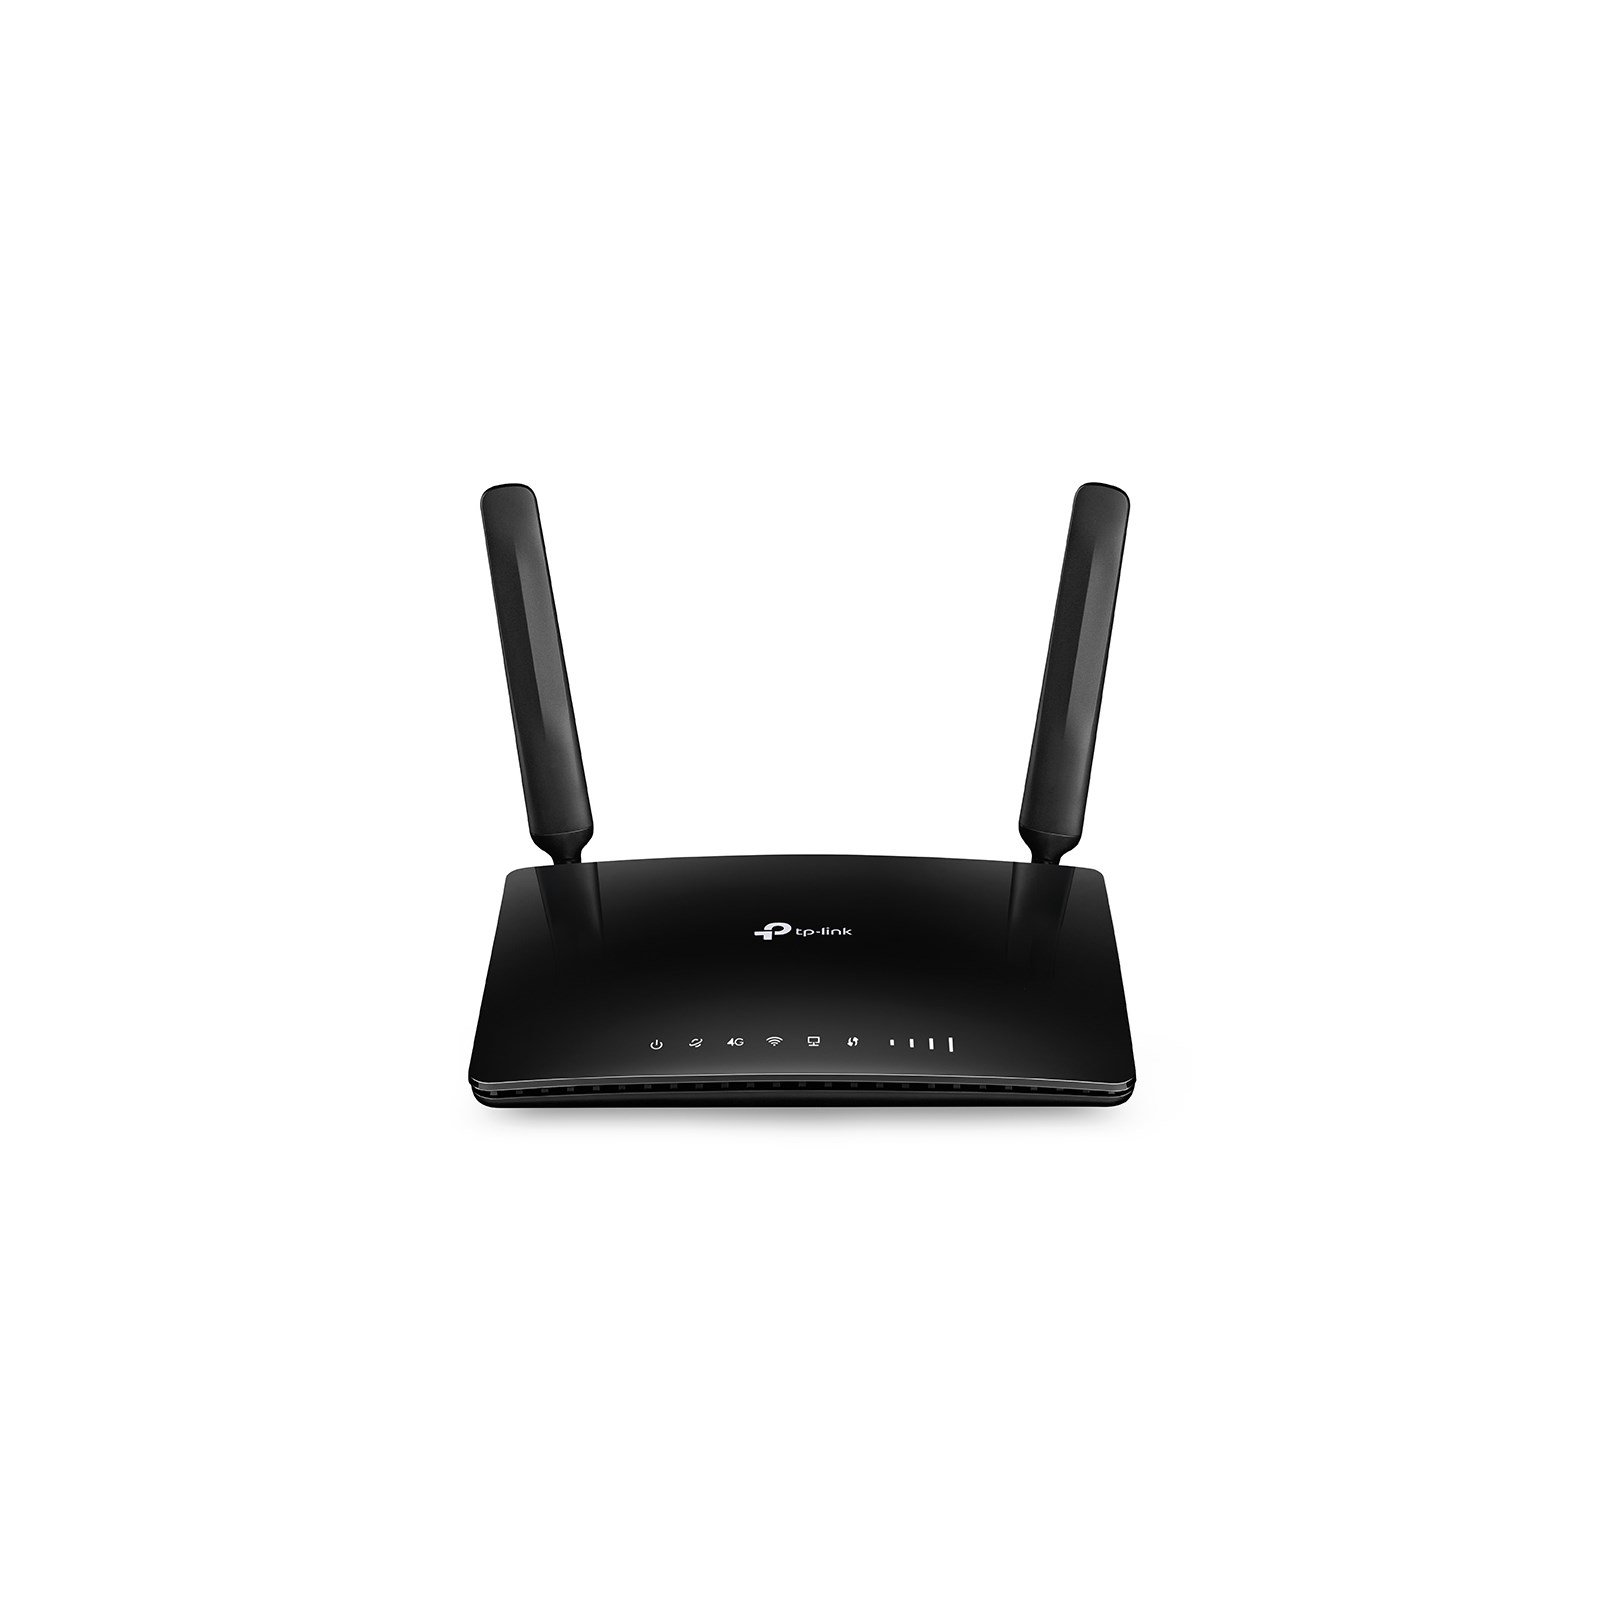 shave Anoi stretch TP-Link AC1200 867Mbps (5GHz) 450Mbps (2.4GHz) Dual-Band Wireless Dual Band  4G LTE Router (Black) V1.0 - ARCHER MR400 | CCL